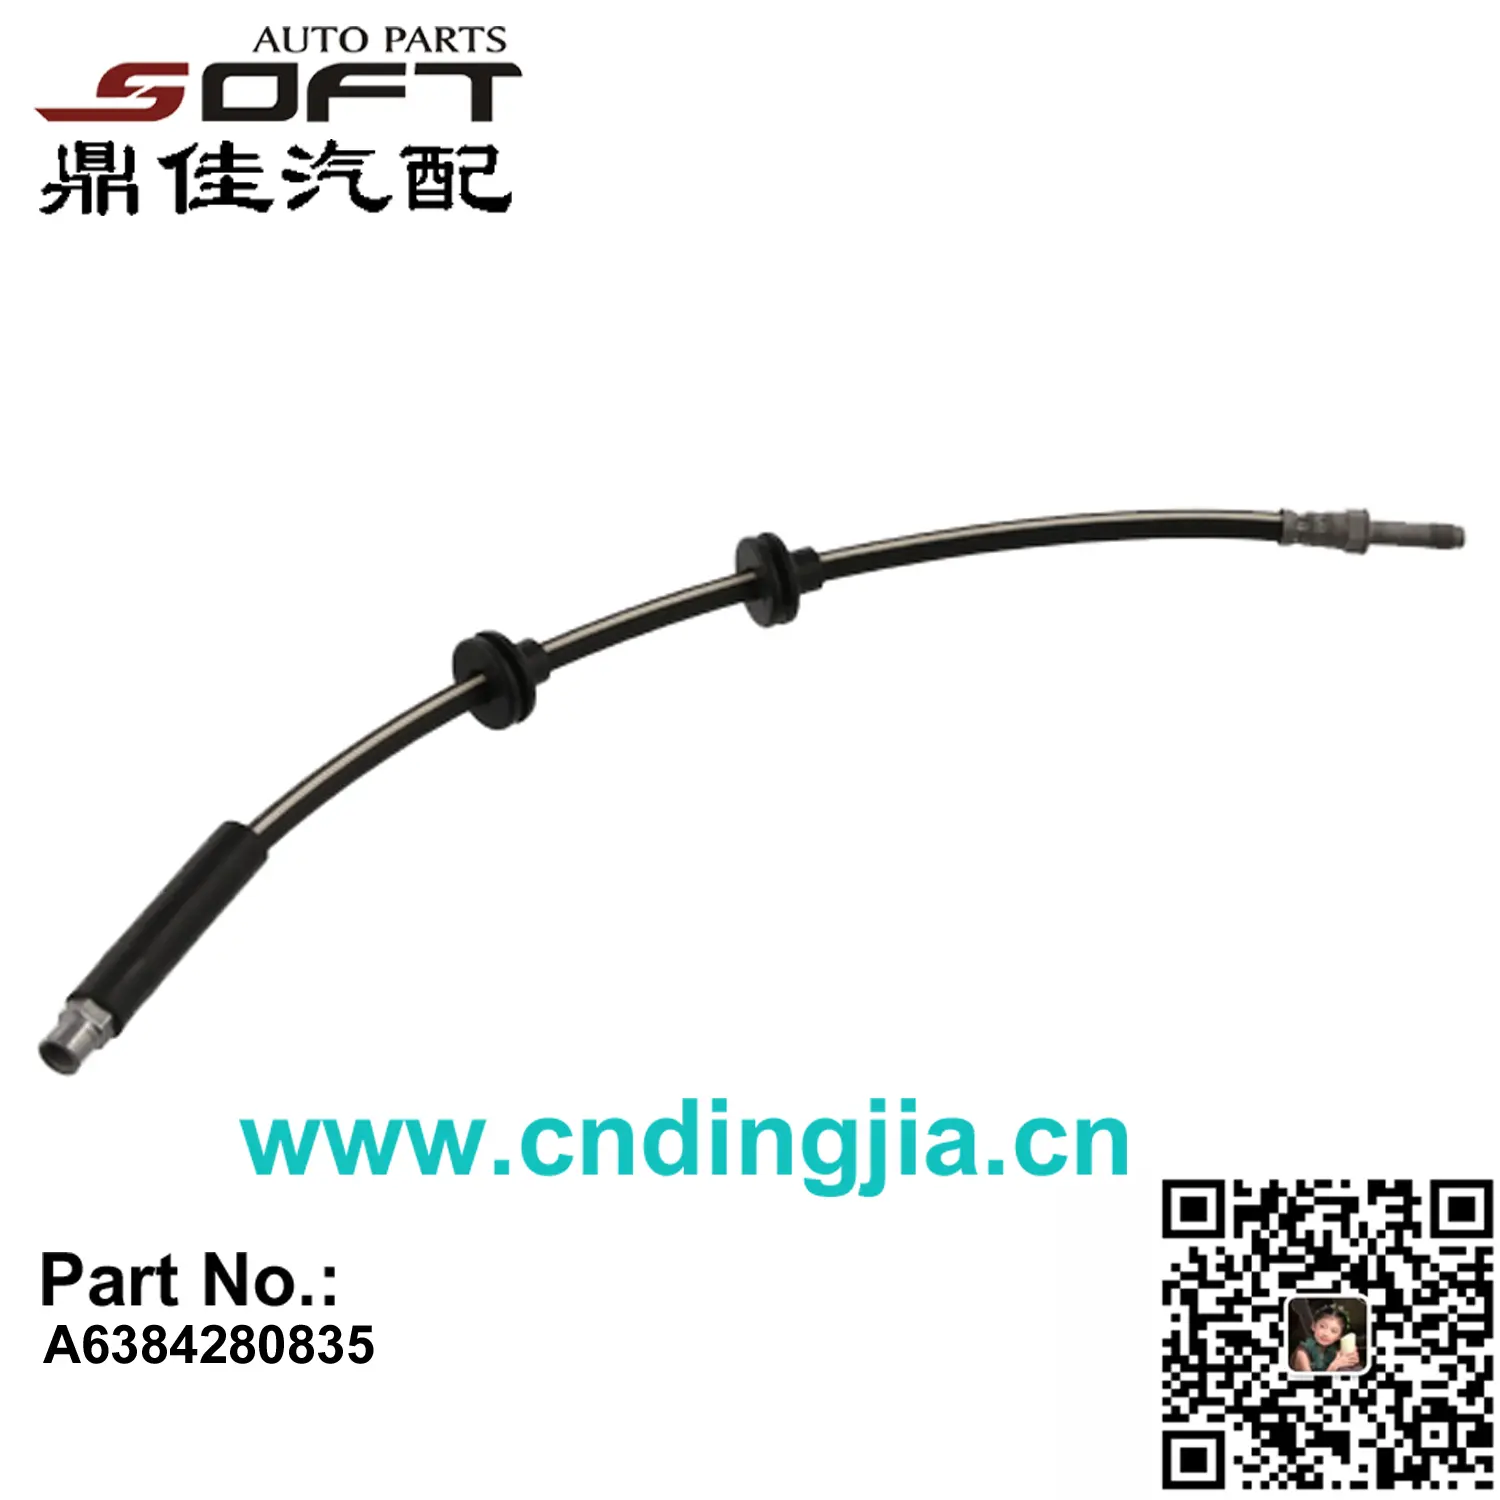 For Mercedes Benz V - class Vito Front brake hose at rear A6384280835